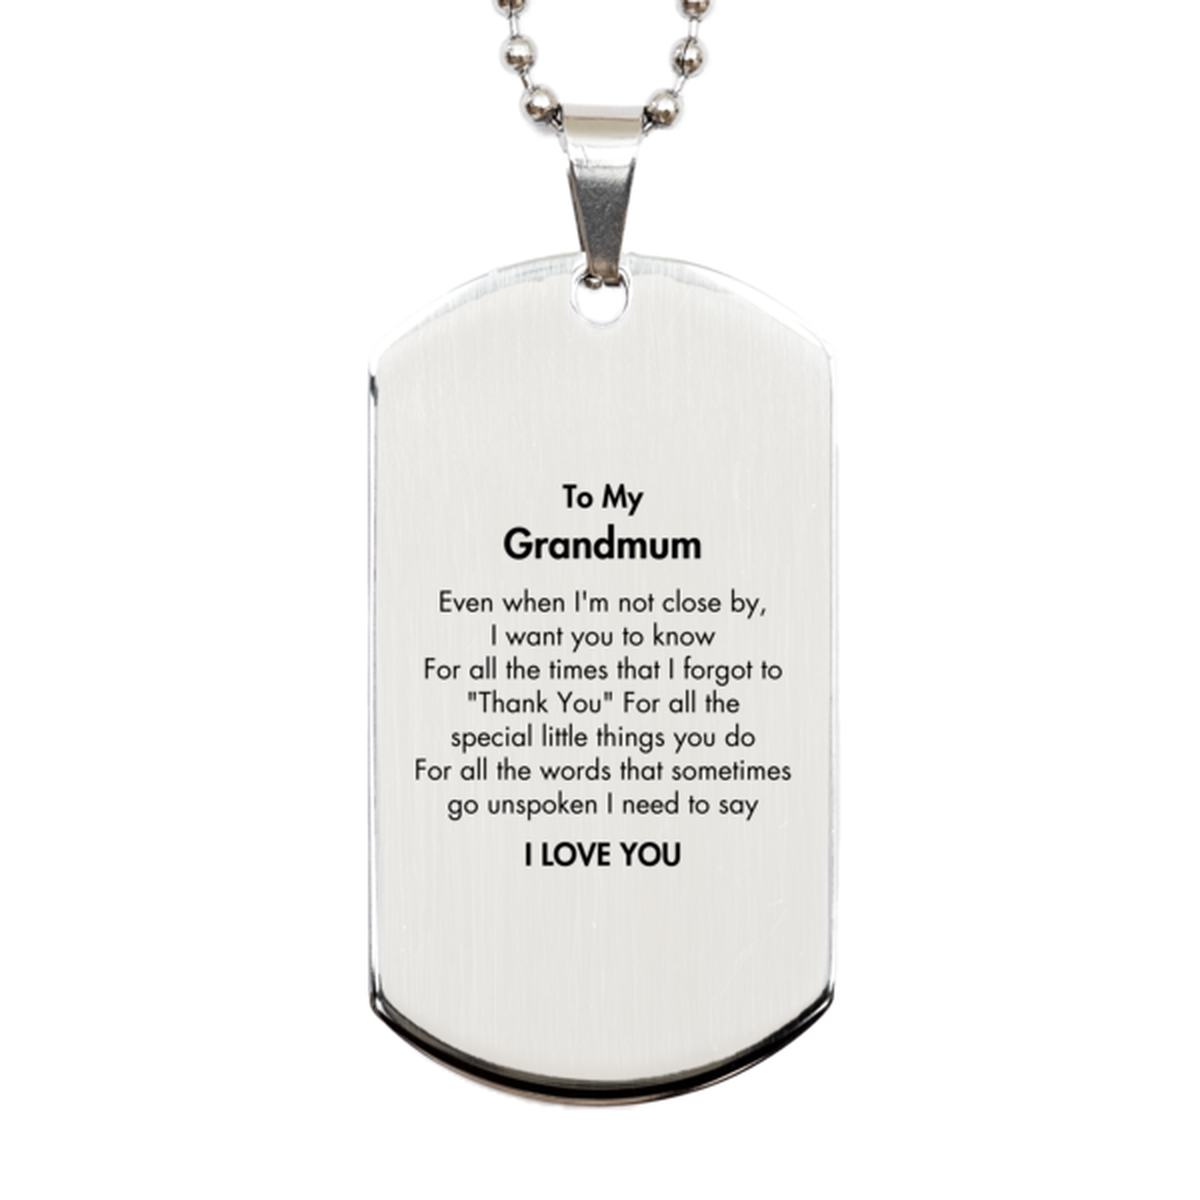 Thank You Gifts for Grandmum, Keepsake Silver Dog Tag Gifts for Grandmum Birthday Mother's day Father's Day Grandmum For all the words That sometimes go unspoken I need to say I LOVE YOU